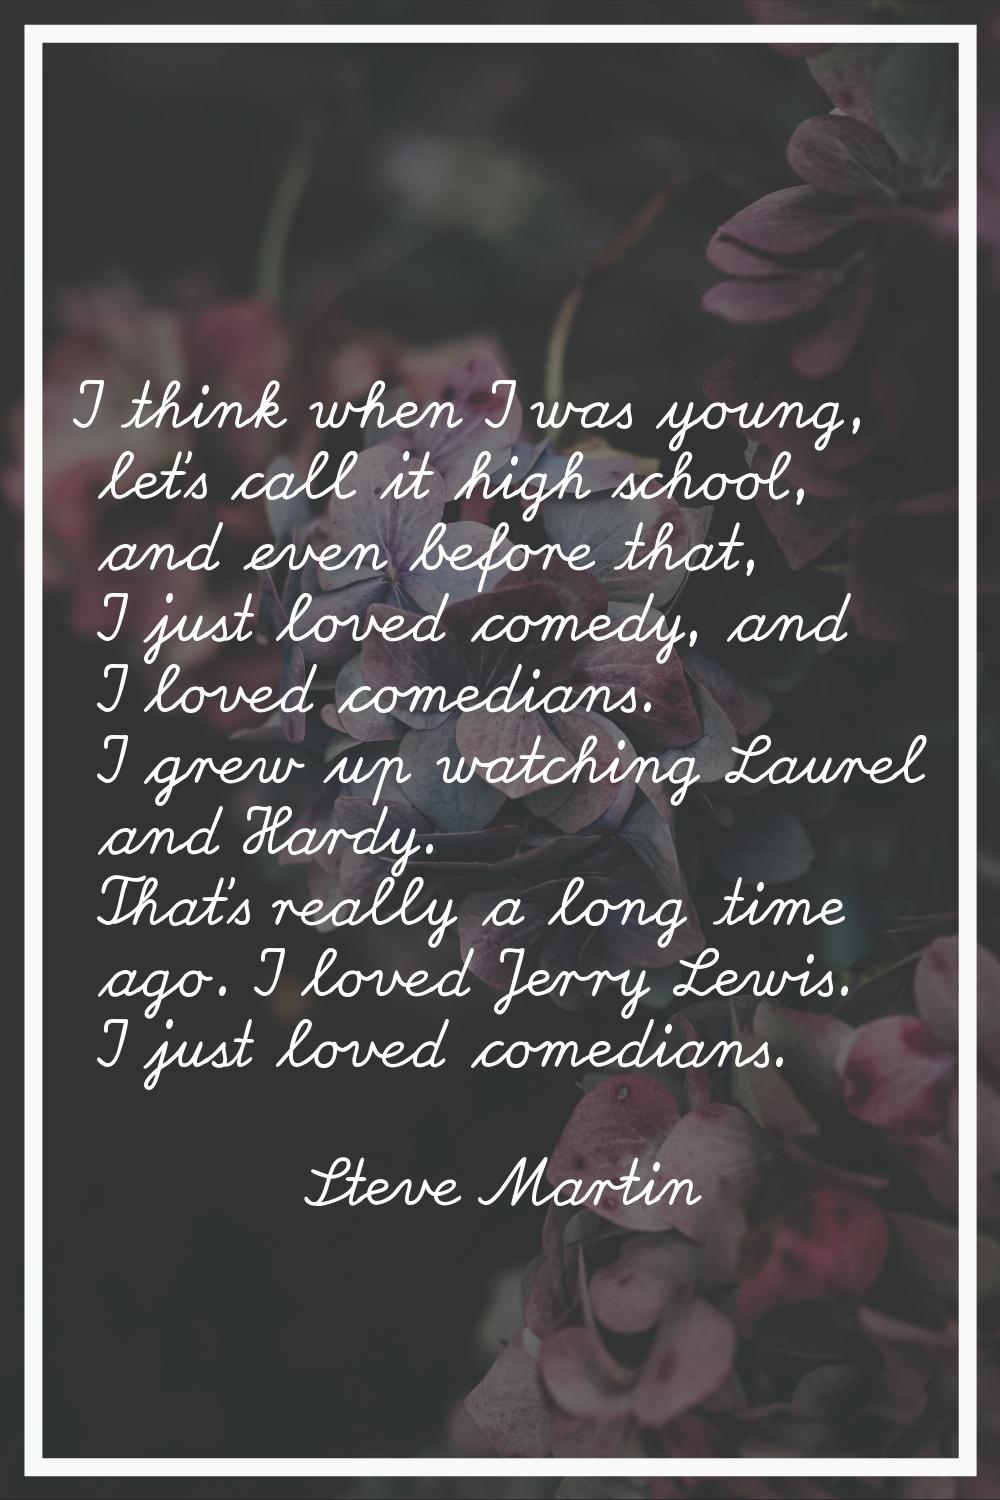 I think when I was young, let's call it high school, and even before that, I just loved comedy, and